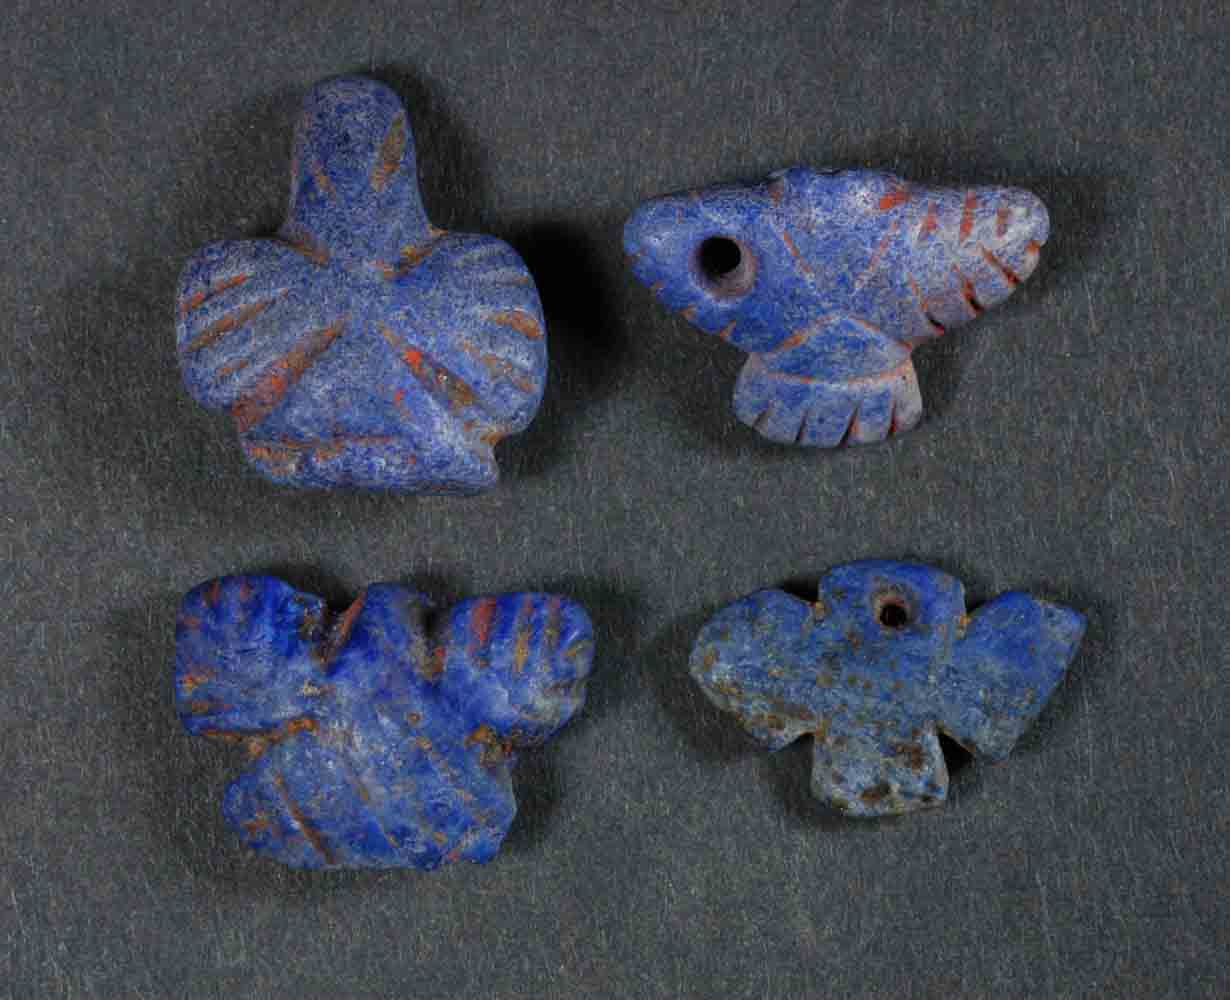 4_Early_Bronze_Age_3300-2000_BC_Sumerian_Lapis_Lazuli_bird_pendants,_representing_Anzu,_the_lion-heded_eagle,_also_known_as_Imdugud_from_the_Mesopotamian_mythology._Mid-3rd_millennium_BC_2.jpg (105.2 KB)